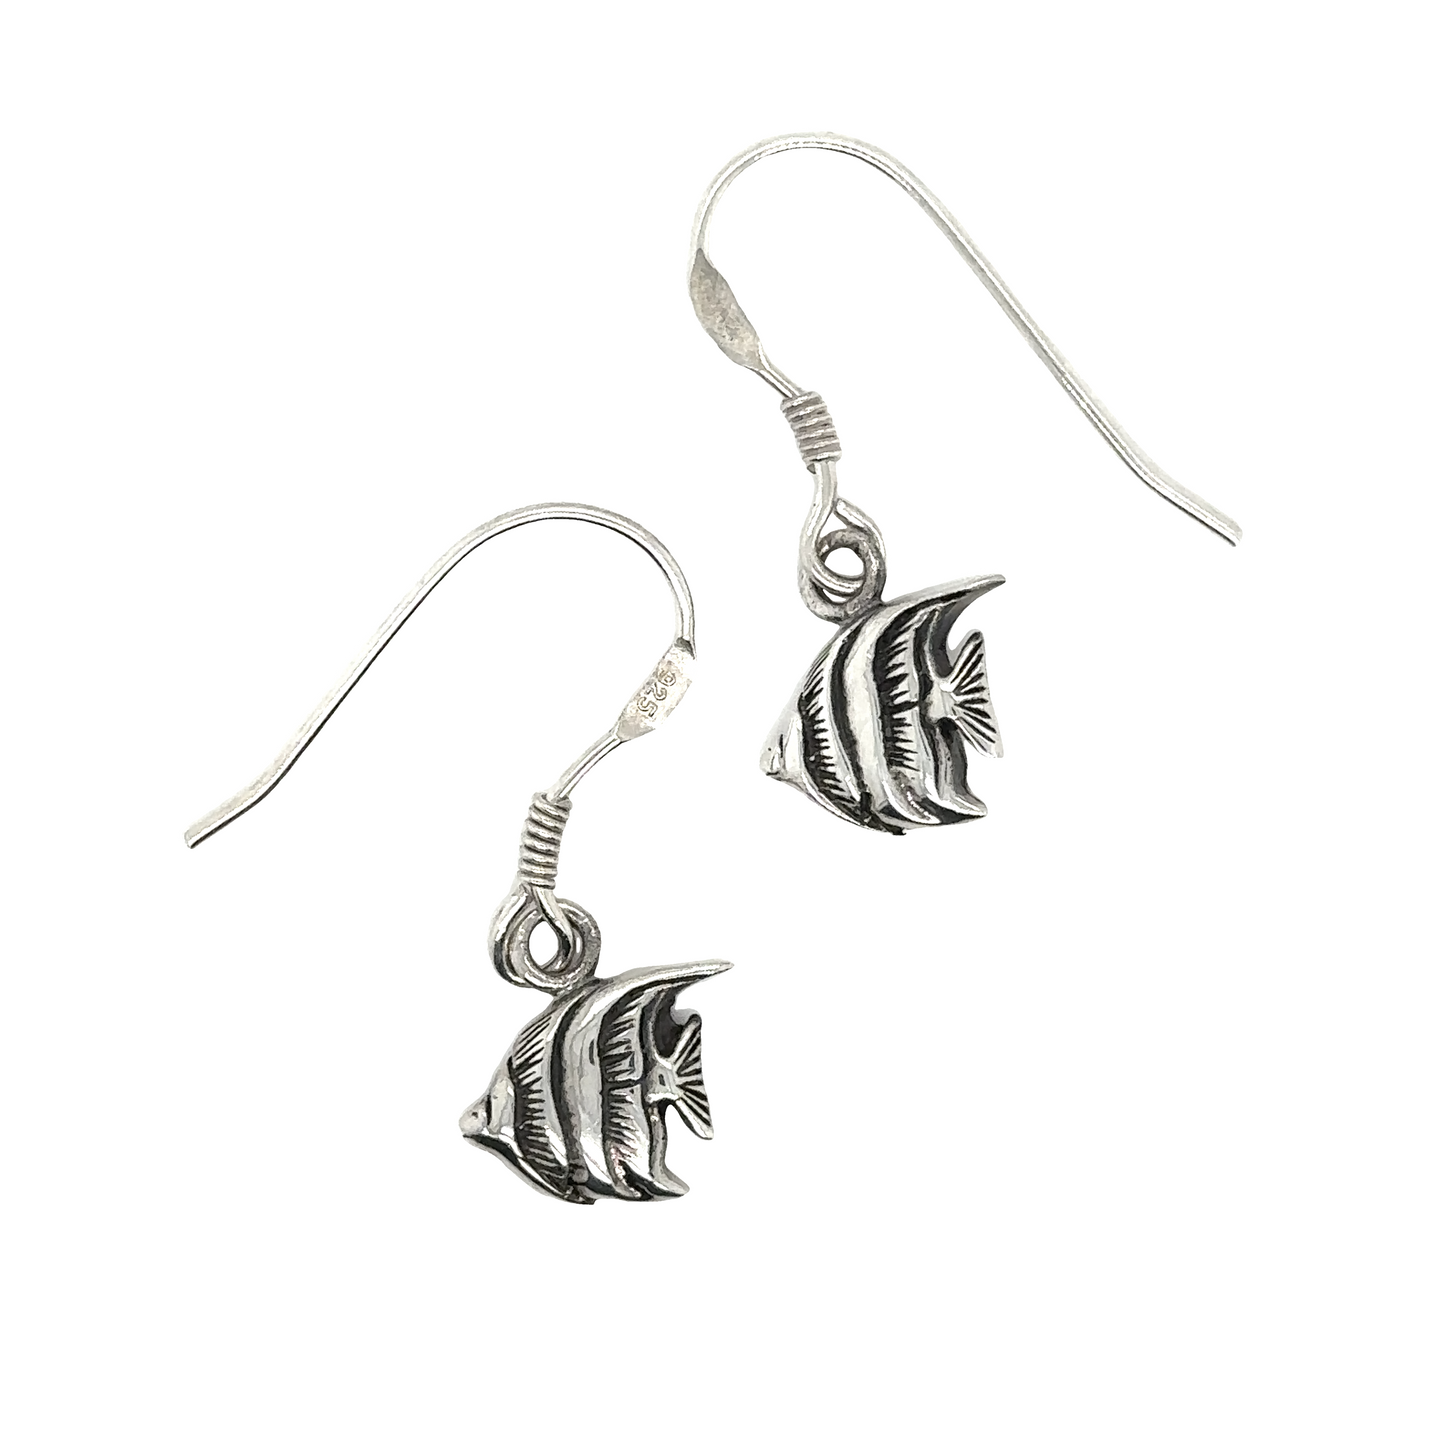 A pair of Super Silver Coral Fish Earrings.